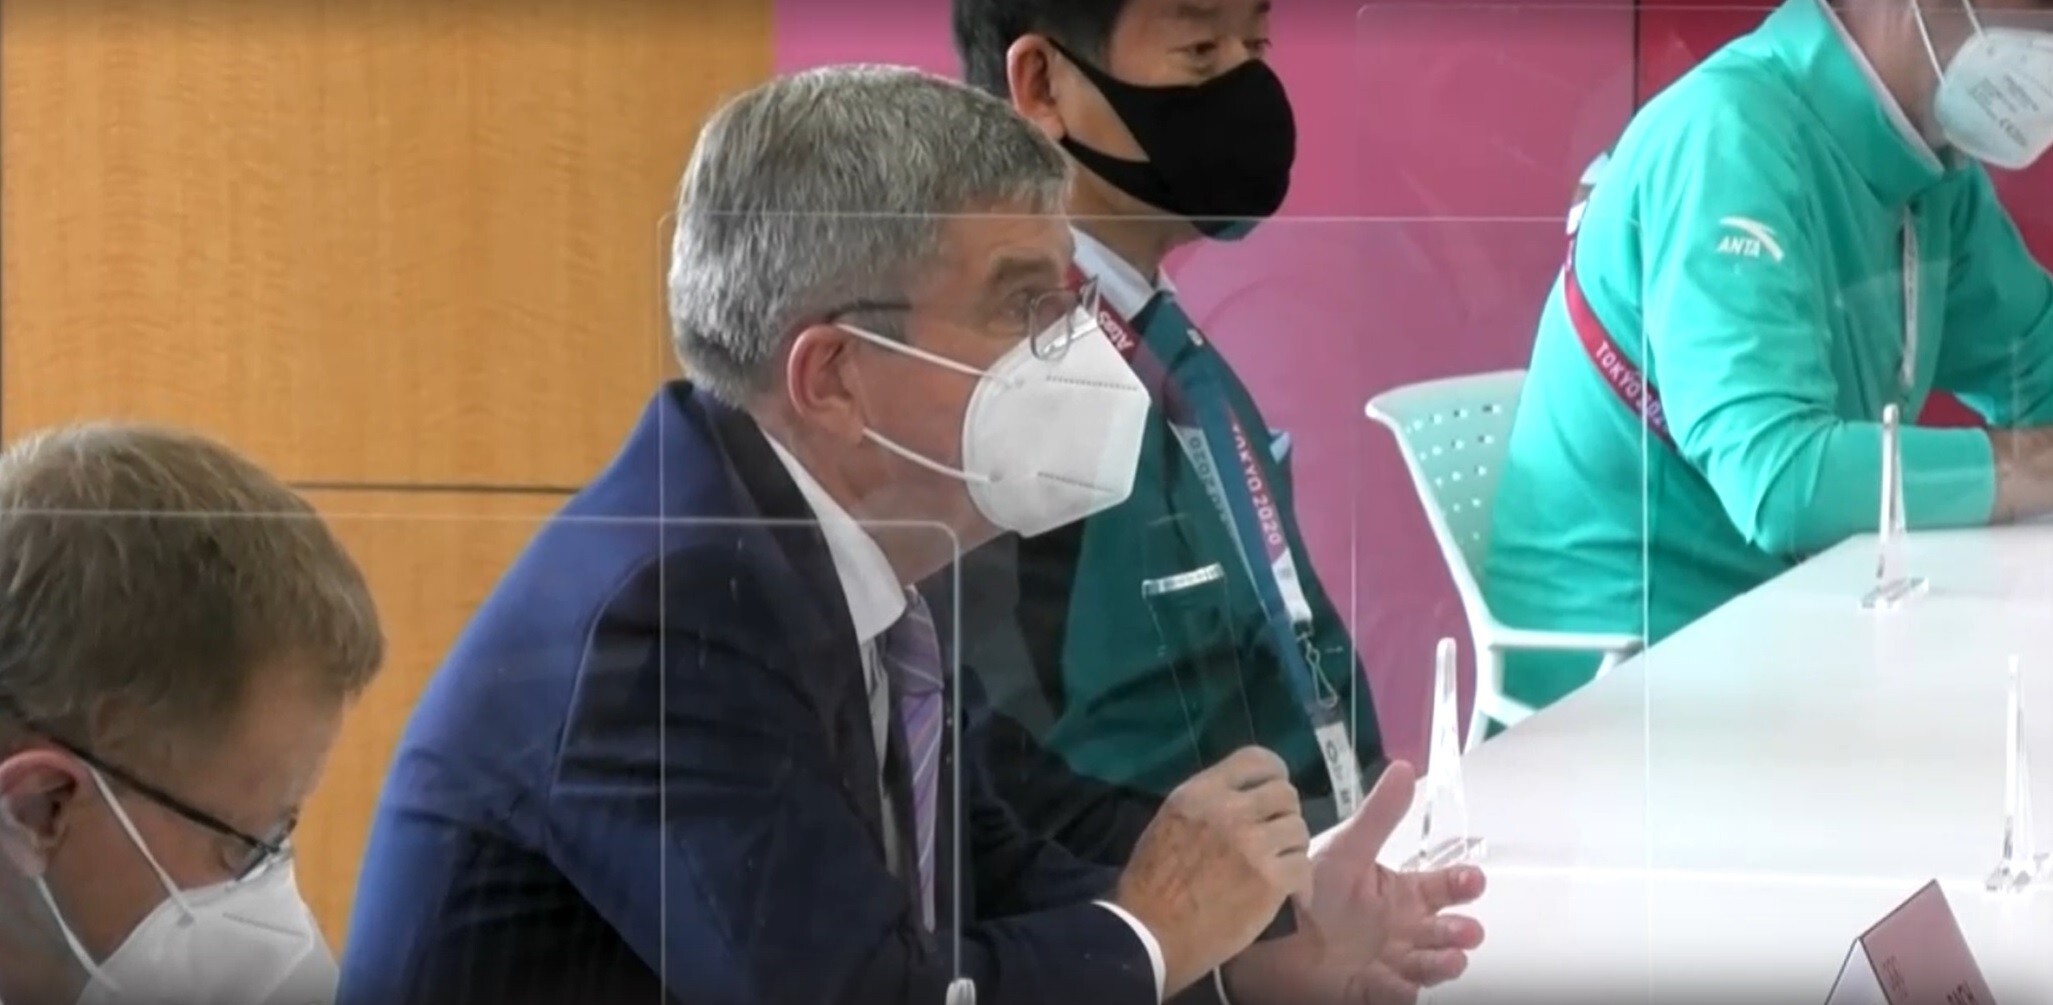 IOC president Thomas Bach at a meeting with Tokyo 2020 organisers on Tuesday. Photo: IOC